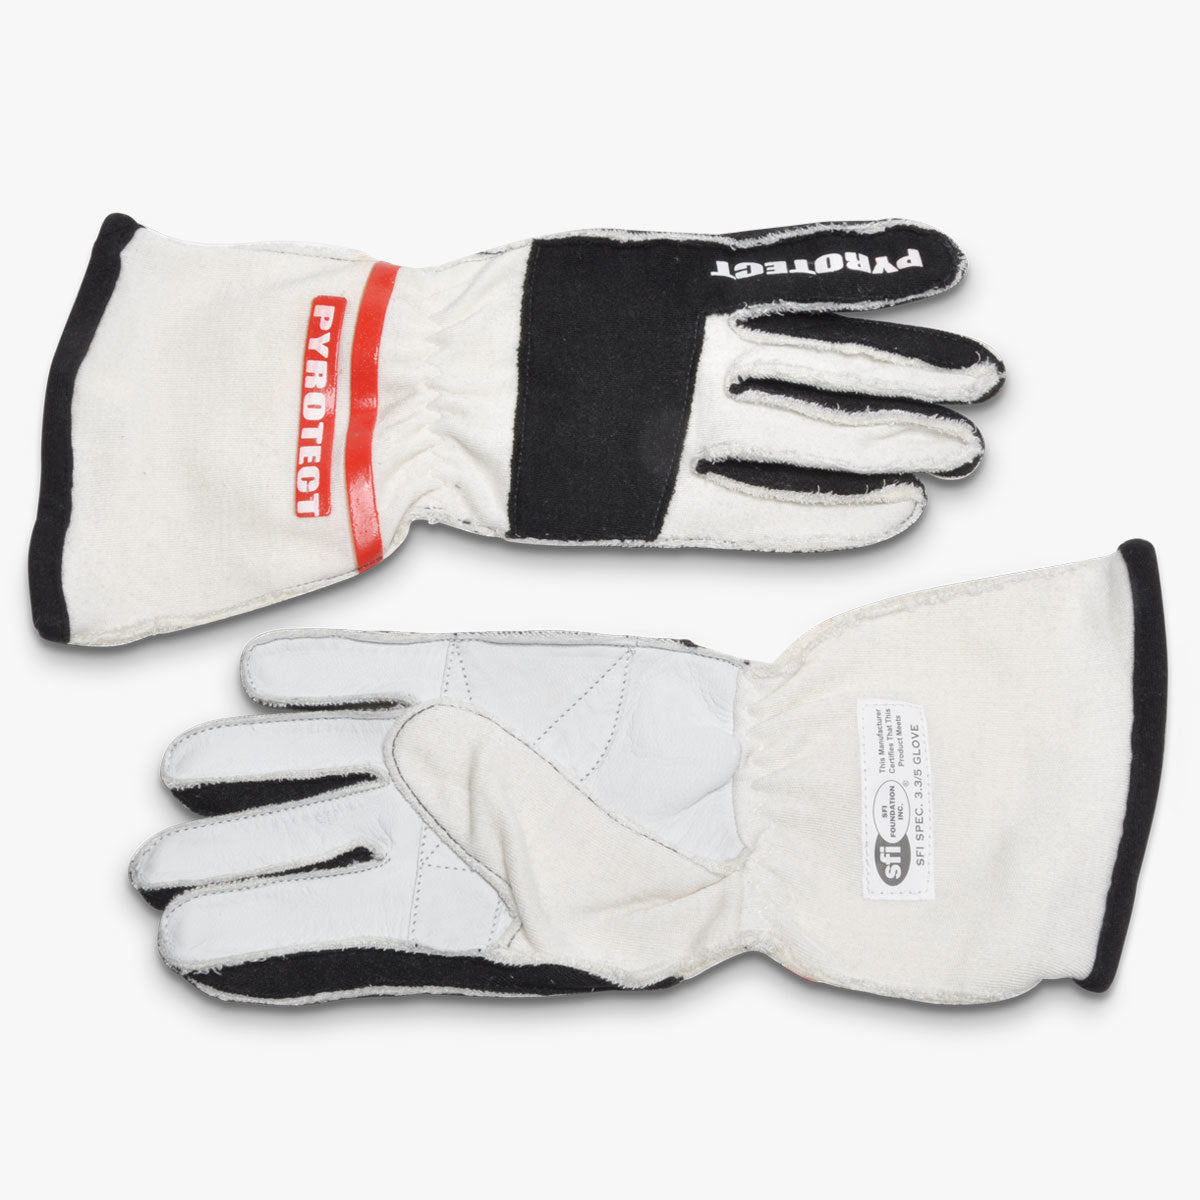 Pyrotect Glove PRO 2 Layer White Large SFI-5 Safety Clothing Driving Gloves main image